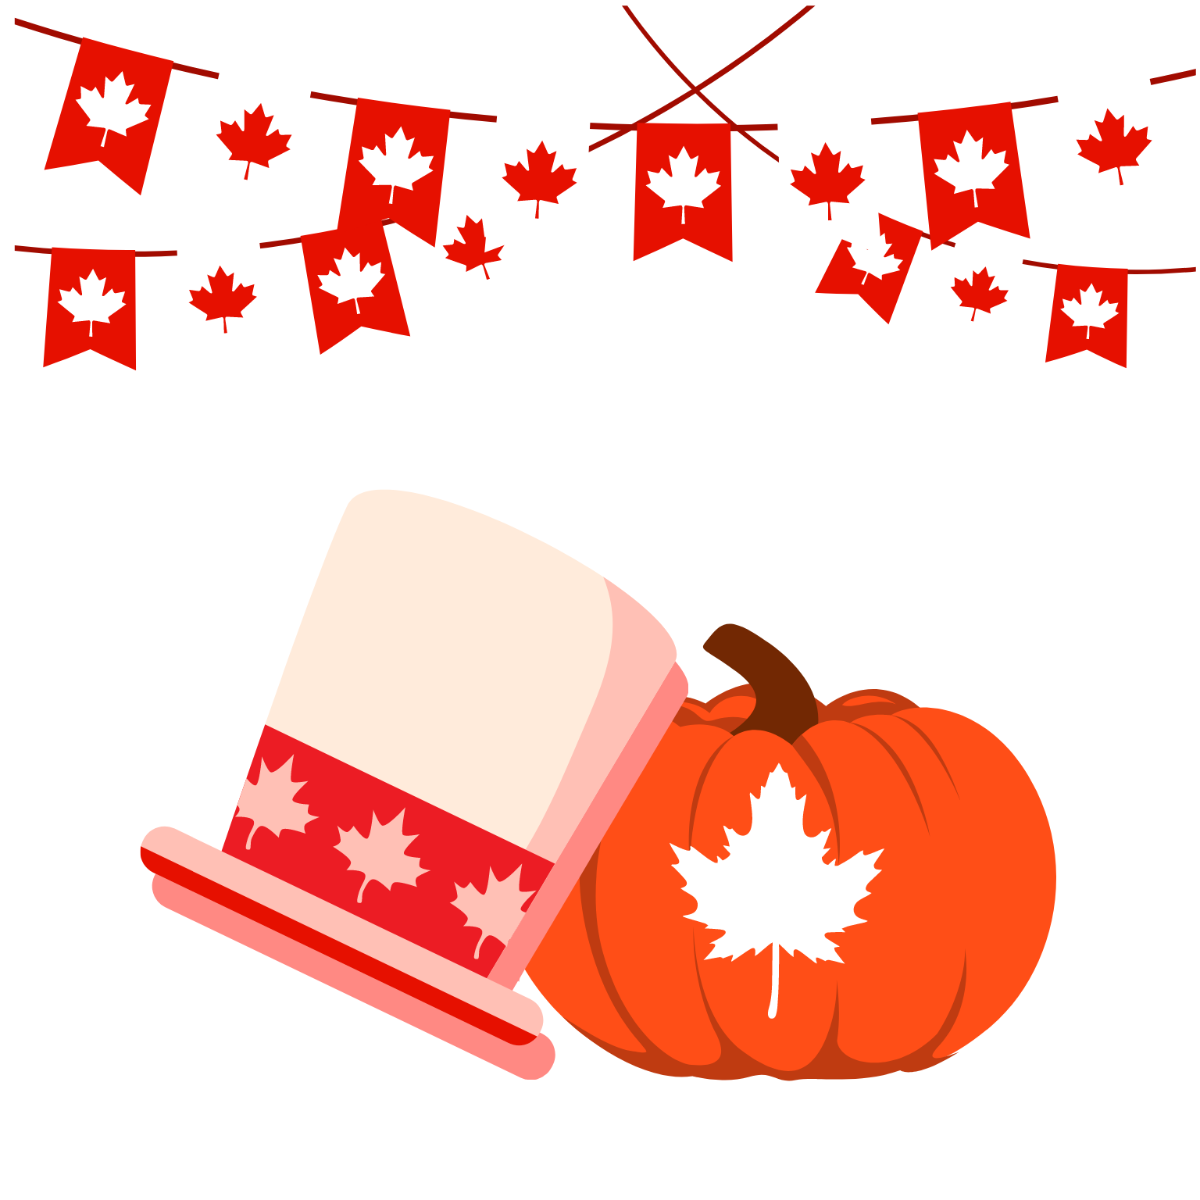 Canada Day Illustration Template